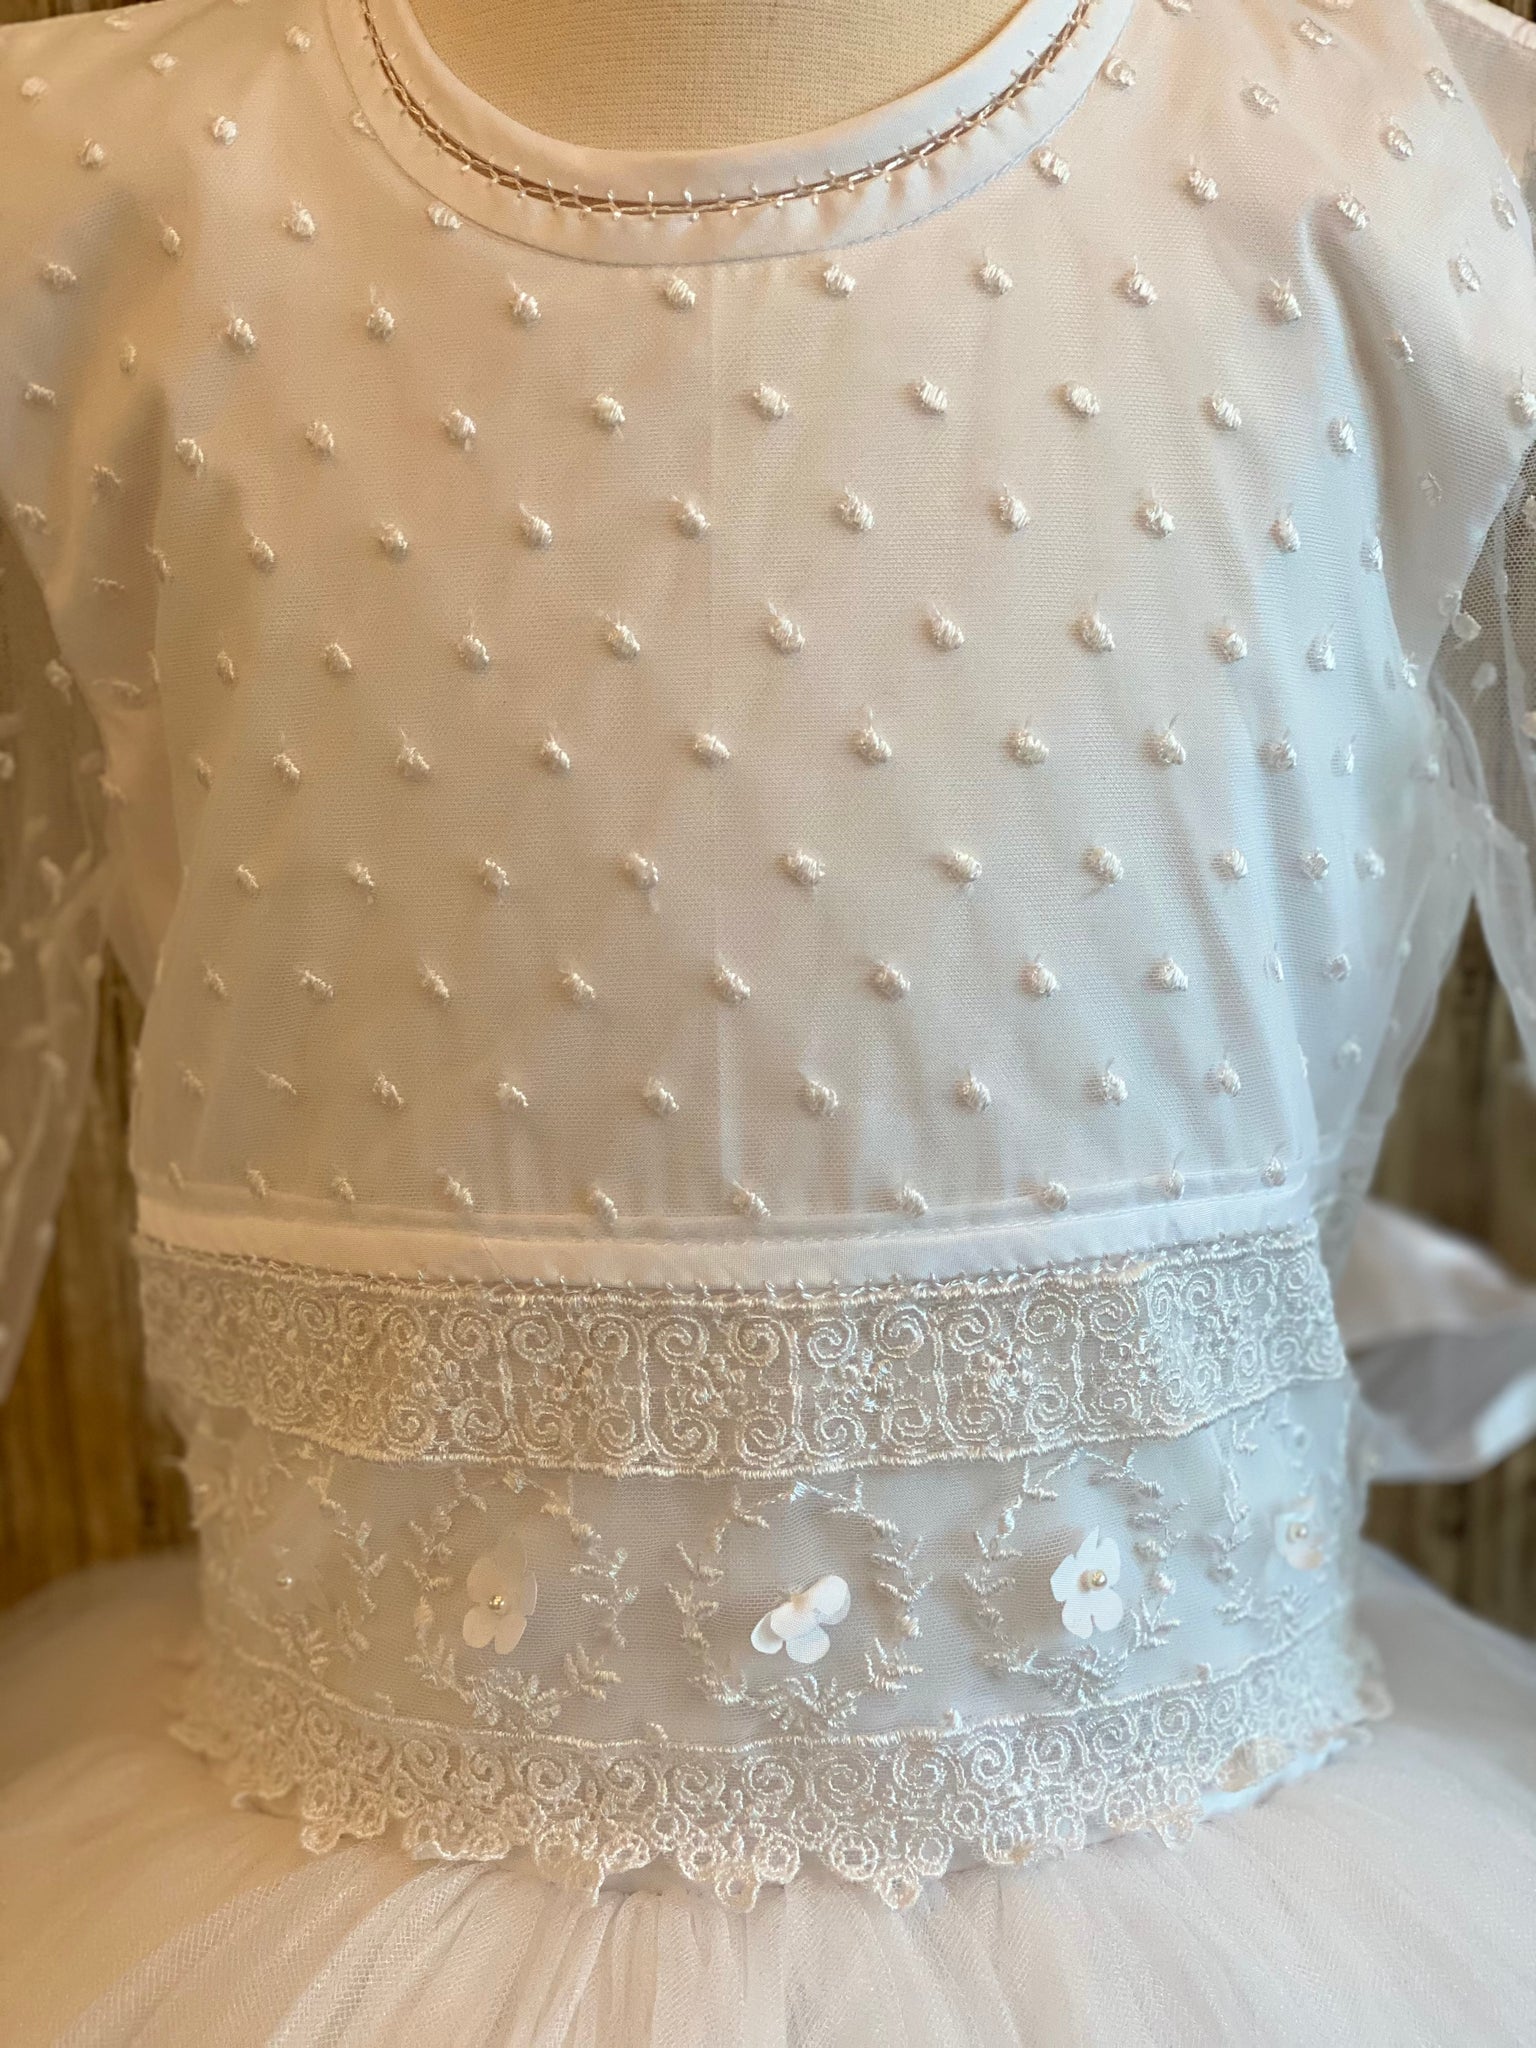 Size 10 and 12 Dotted lace bodice Full sleeve with matching dotted lace with wide flower band on wrist Wide floral and lace paneling on lower/waist  bodice Tulle skirt Back button closure  Satin ribbon for bow